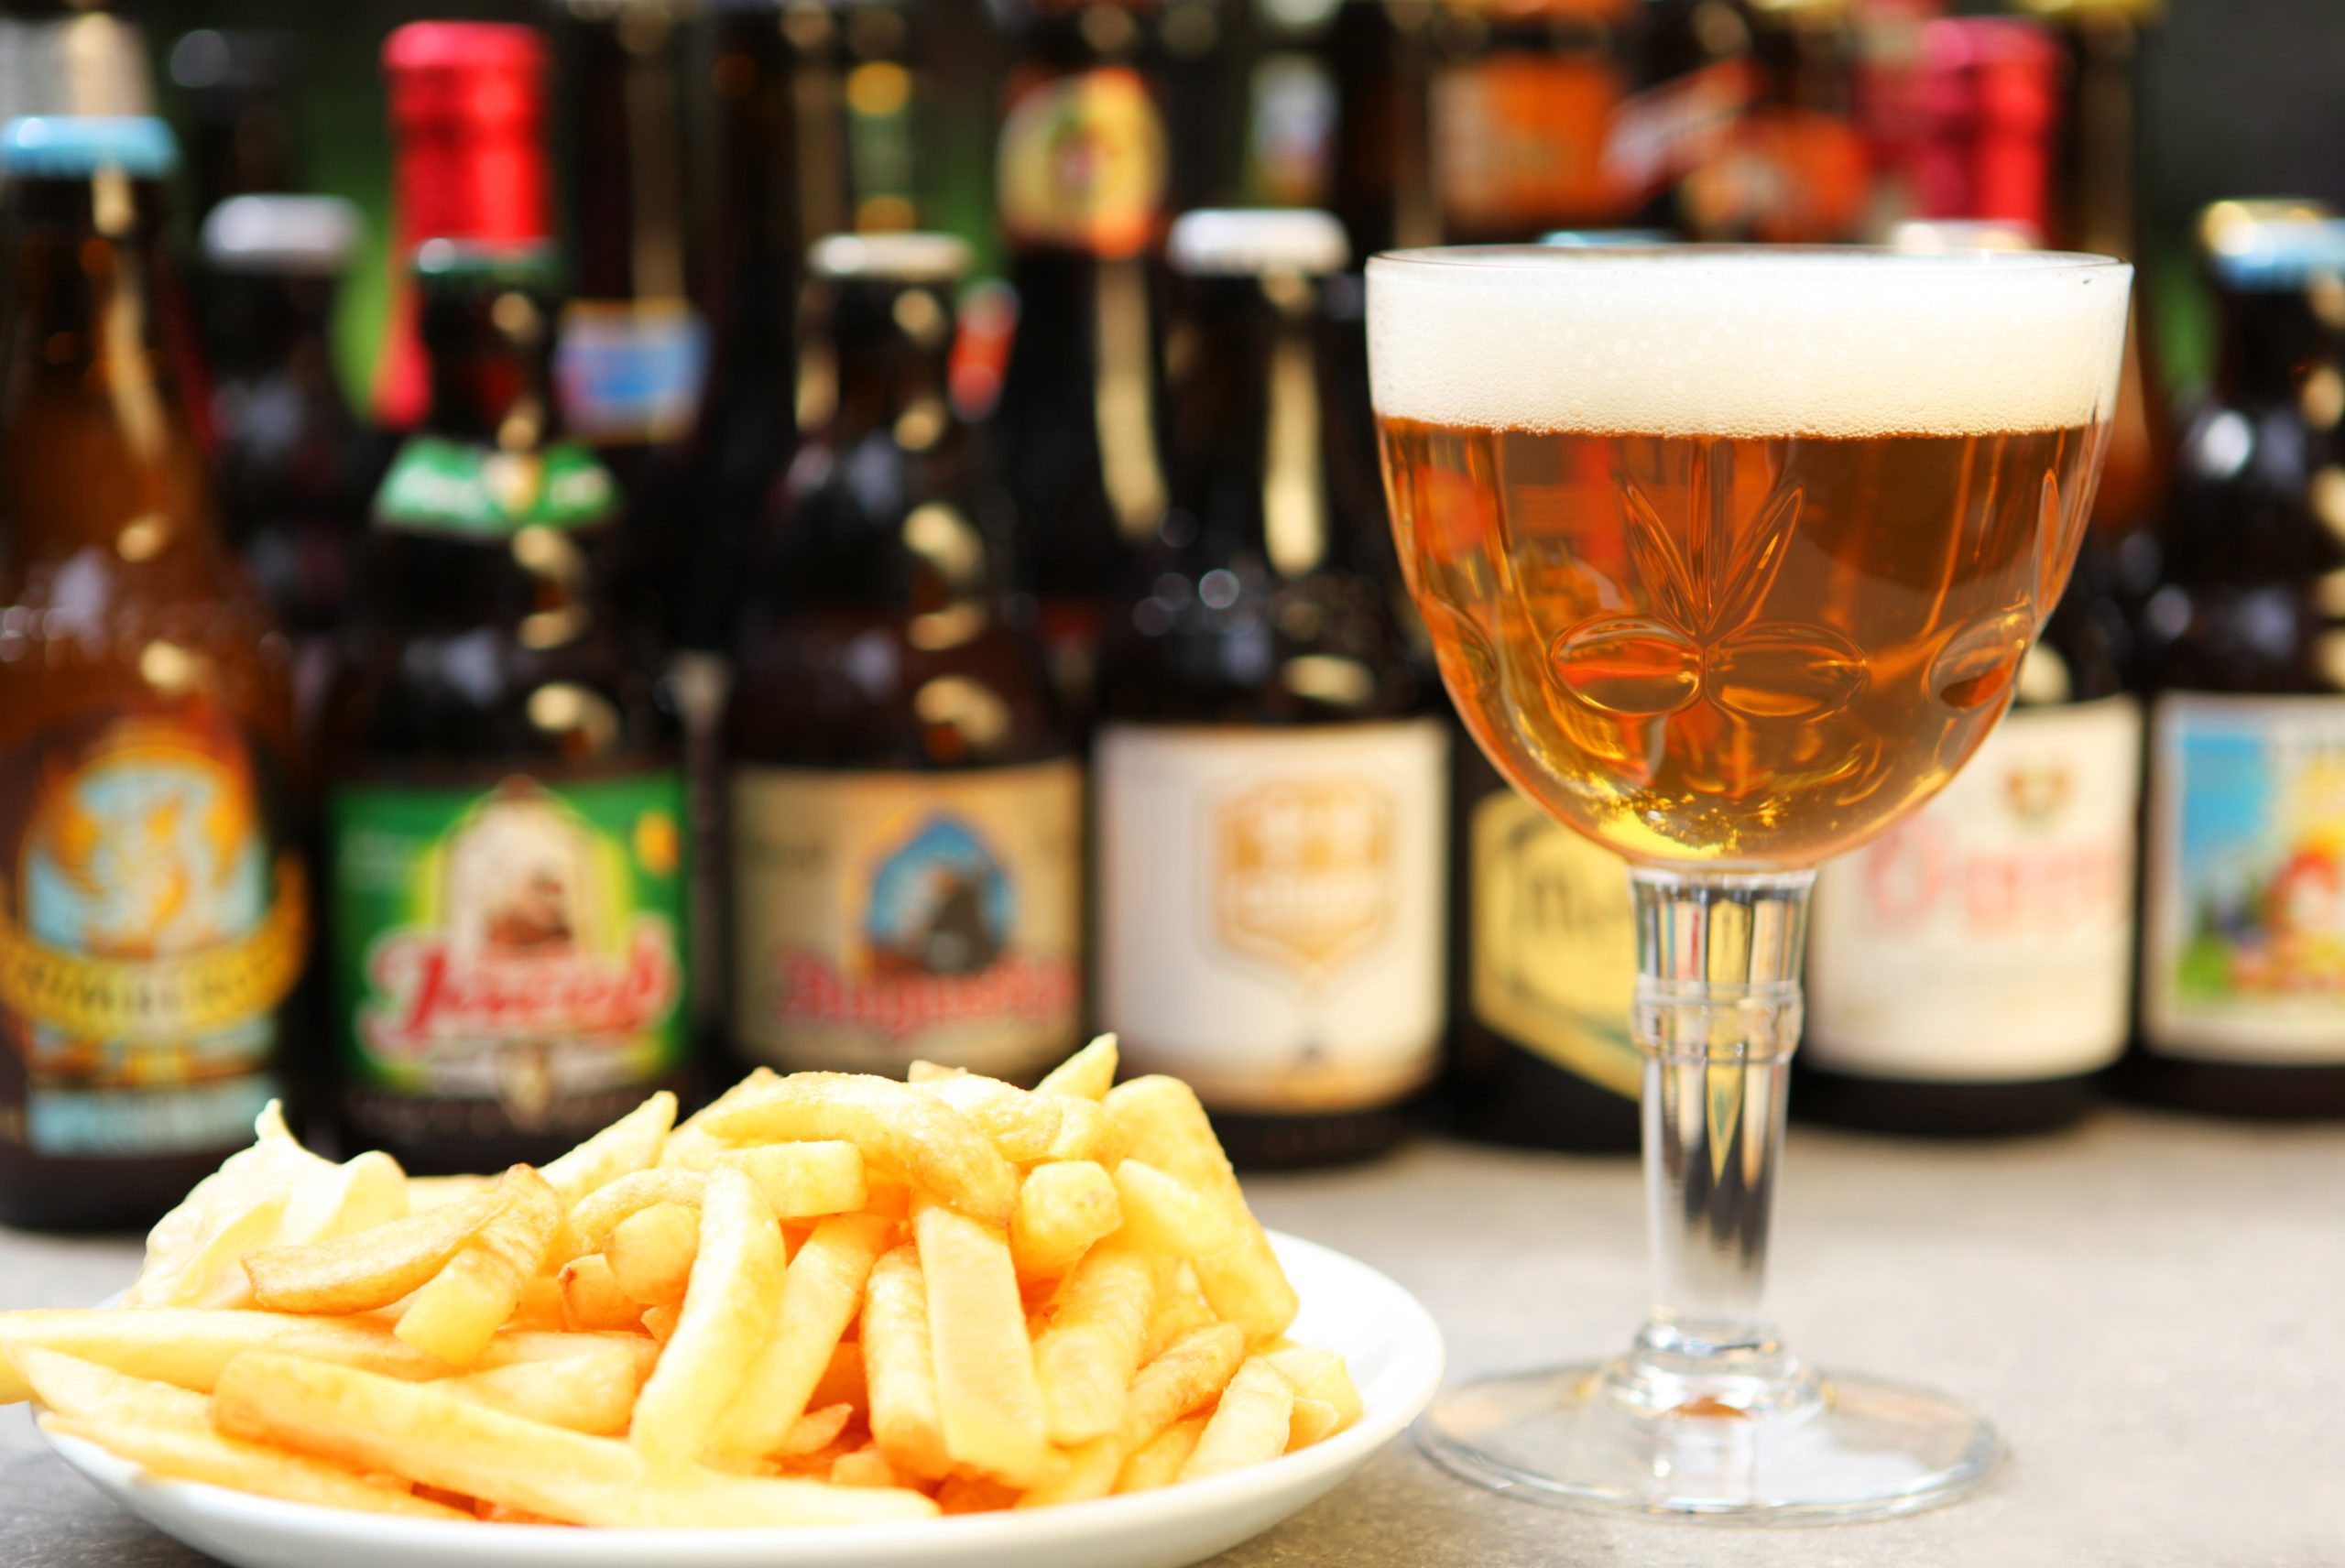 The sixth activity in the 10 best things to do in Belgium is to try Belgian Beers